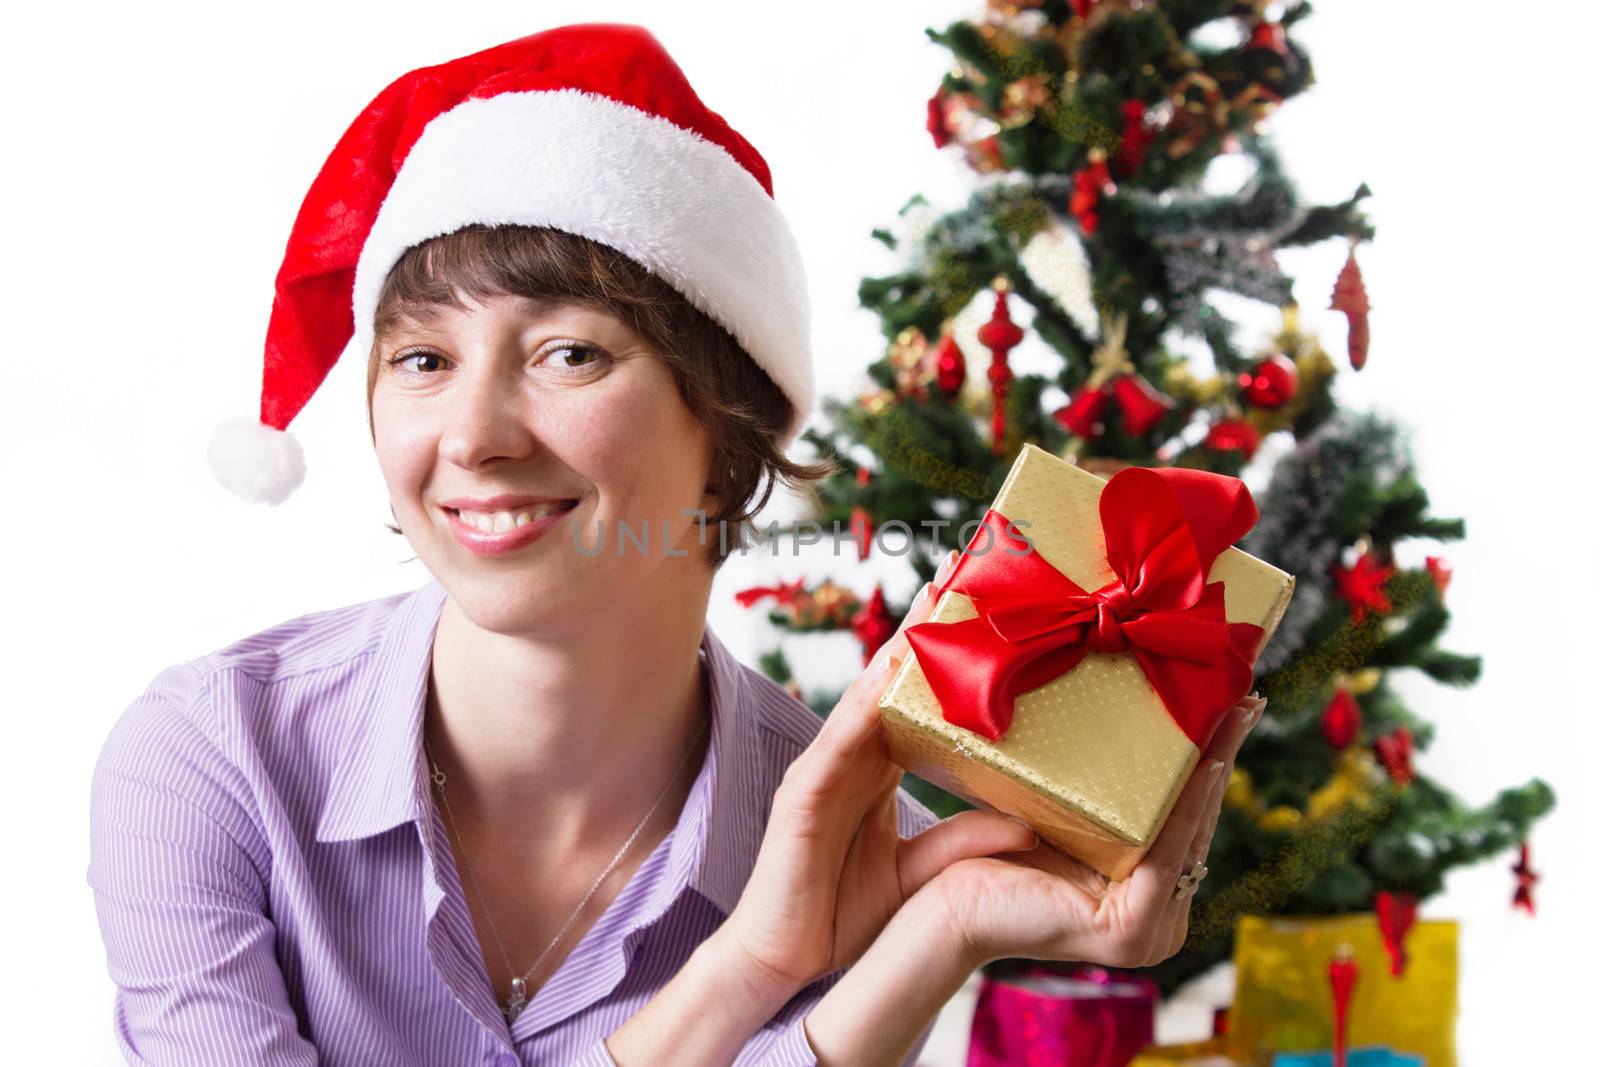 Smiling woman in Santa hat with present under Cristmas tree over white